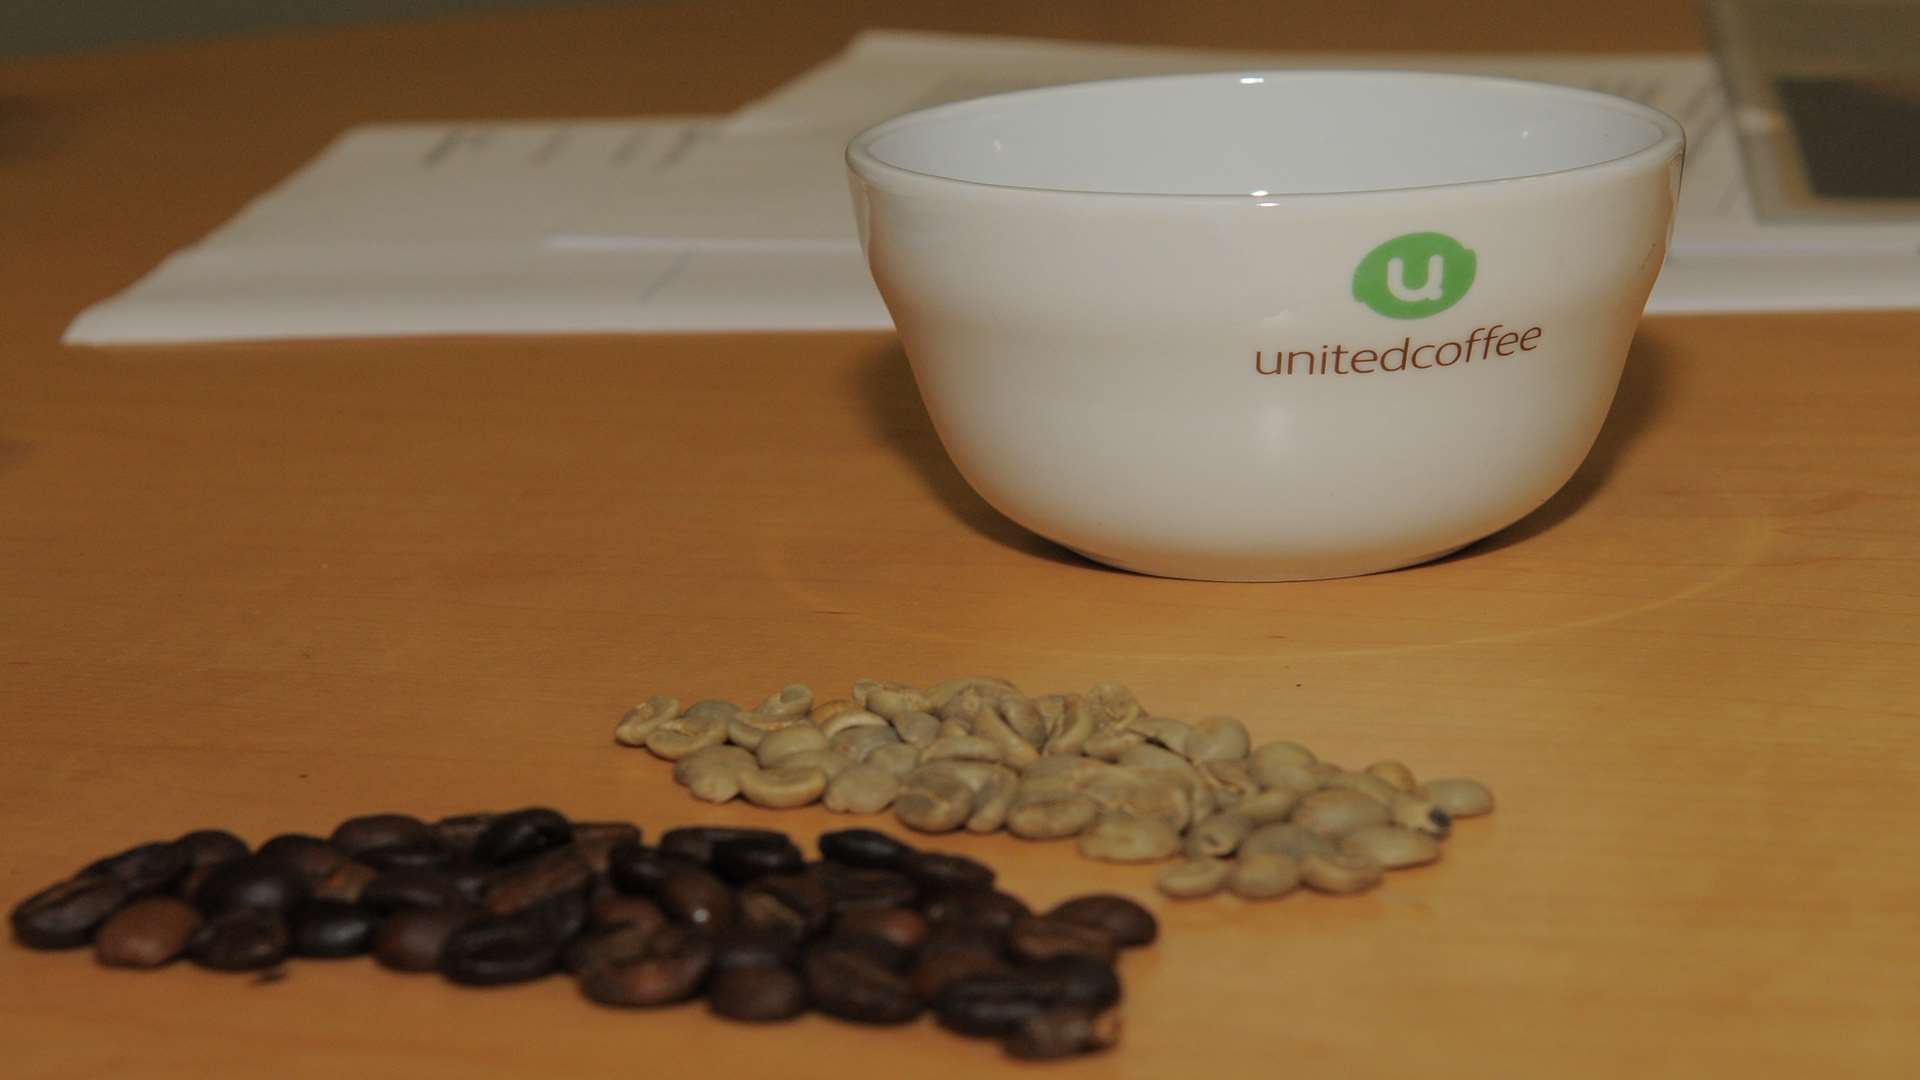 Some of the coffee beans at United Coffee in Dartford